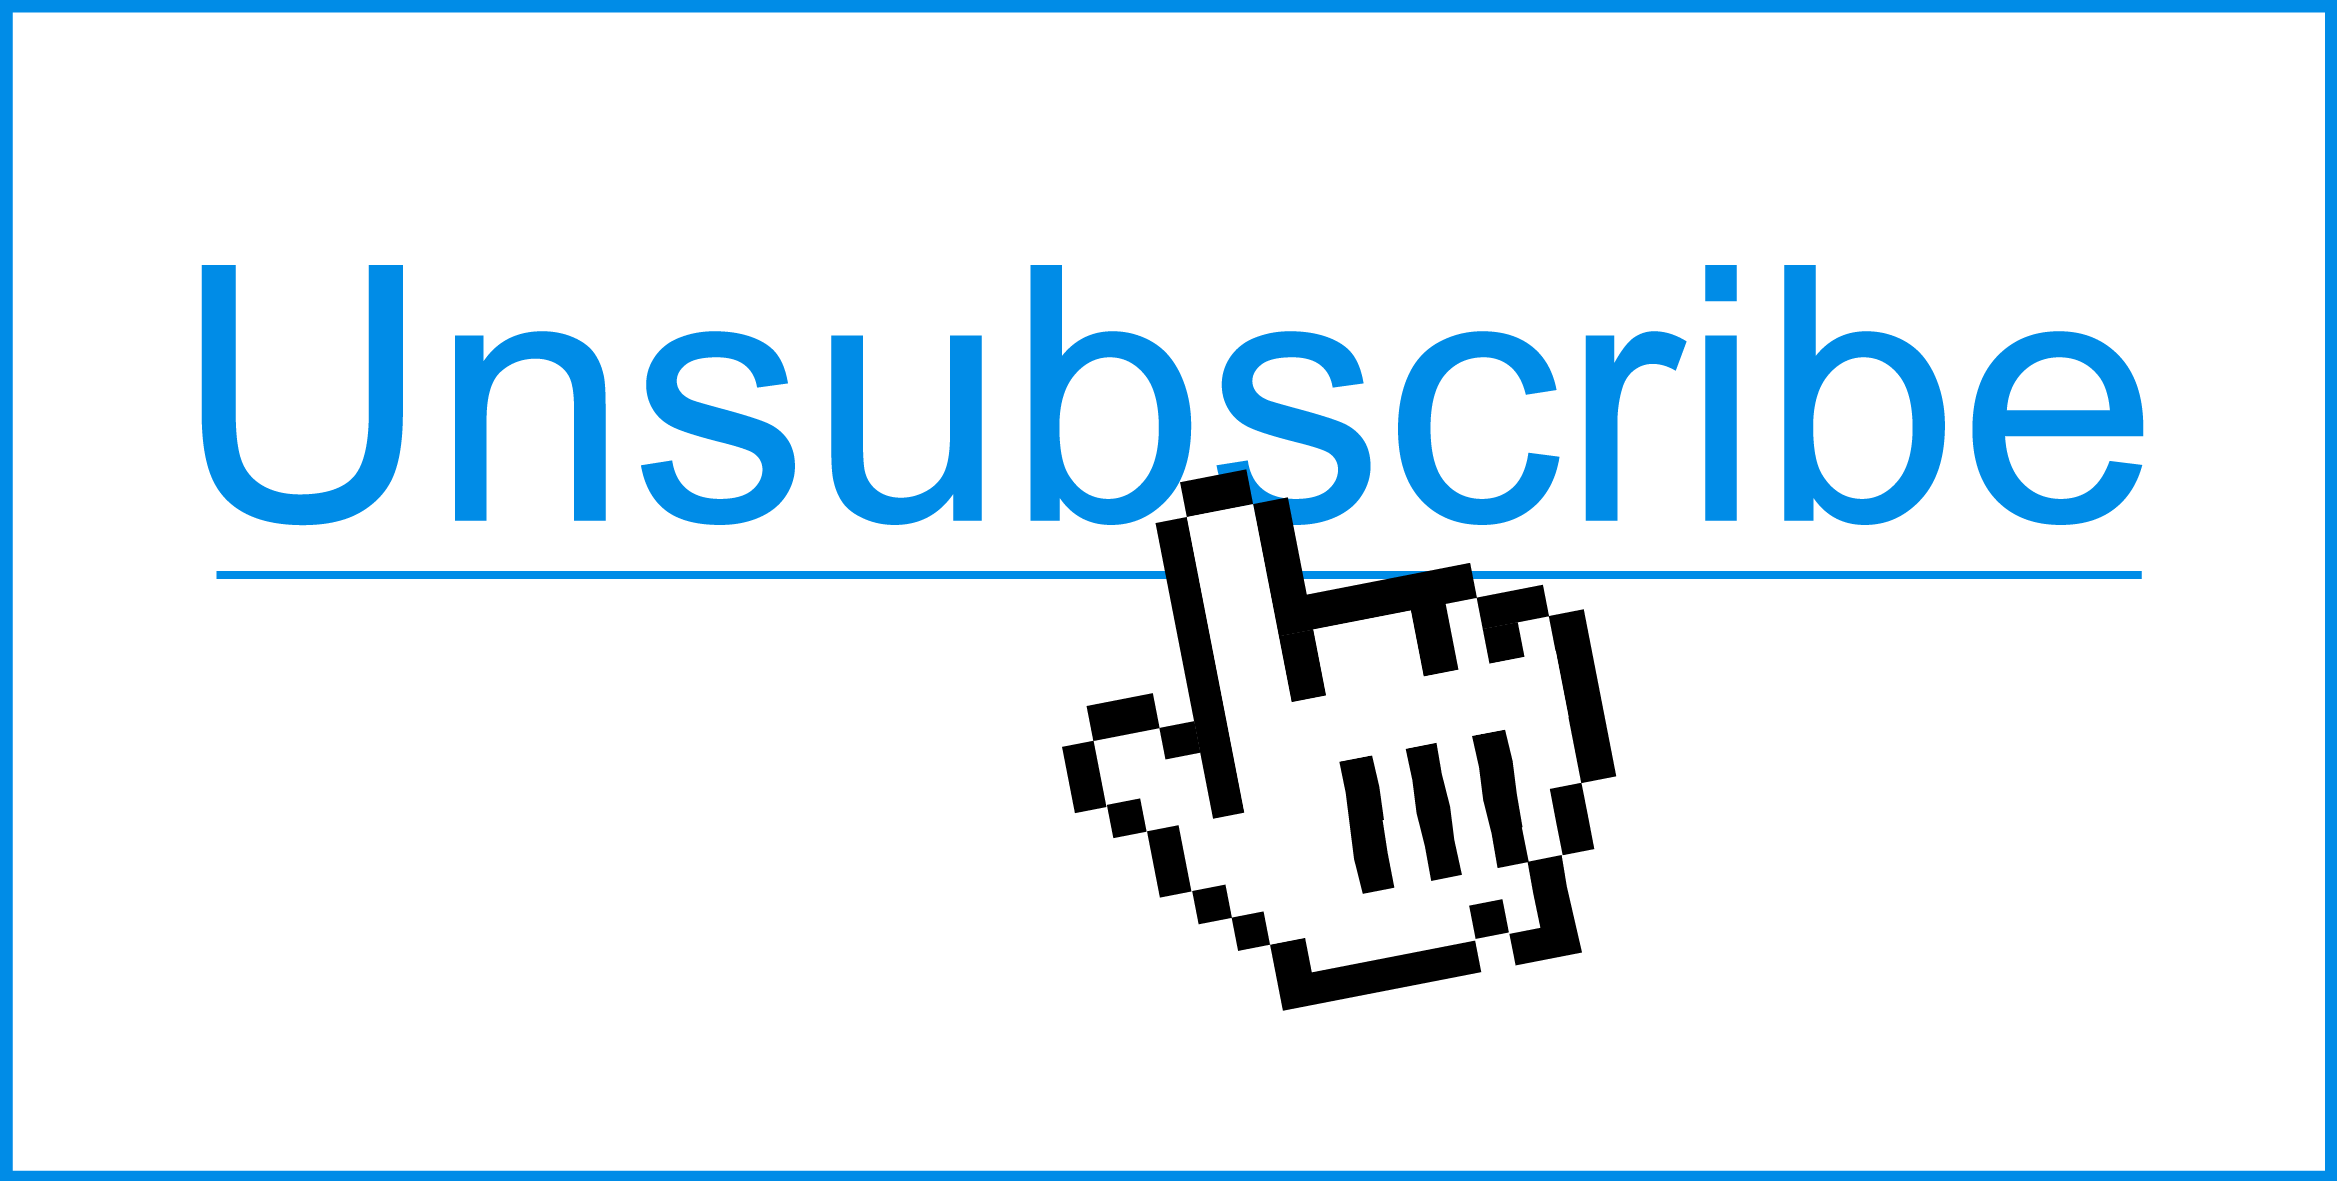 Can You Unsubscribe from This Listserv? | CU Noozfeed